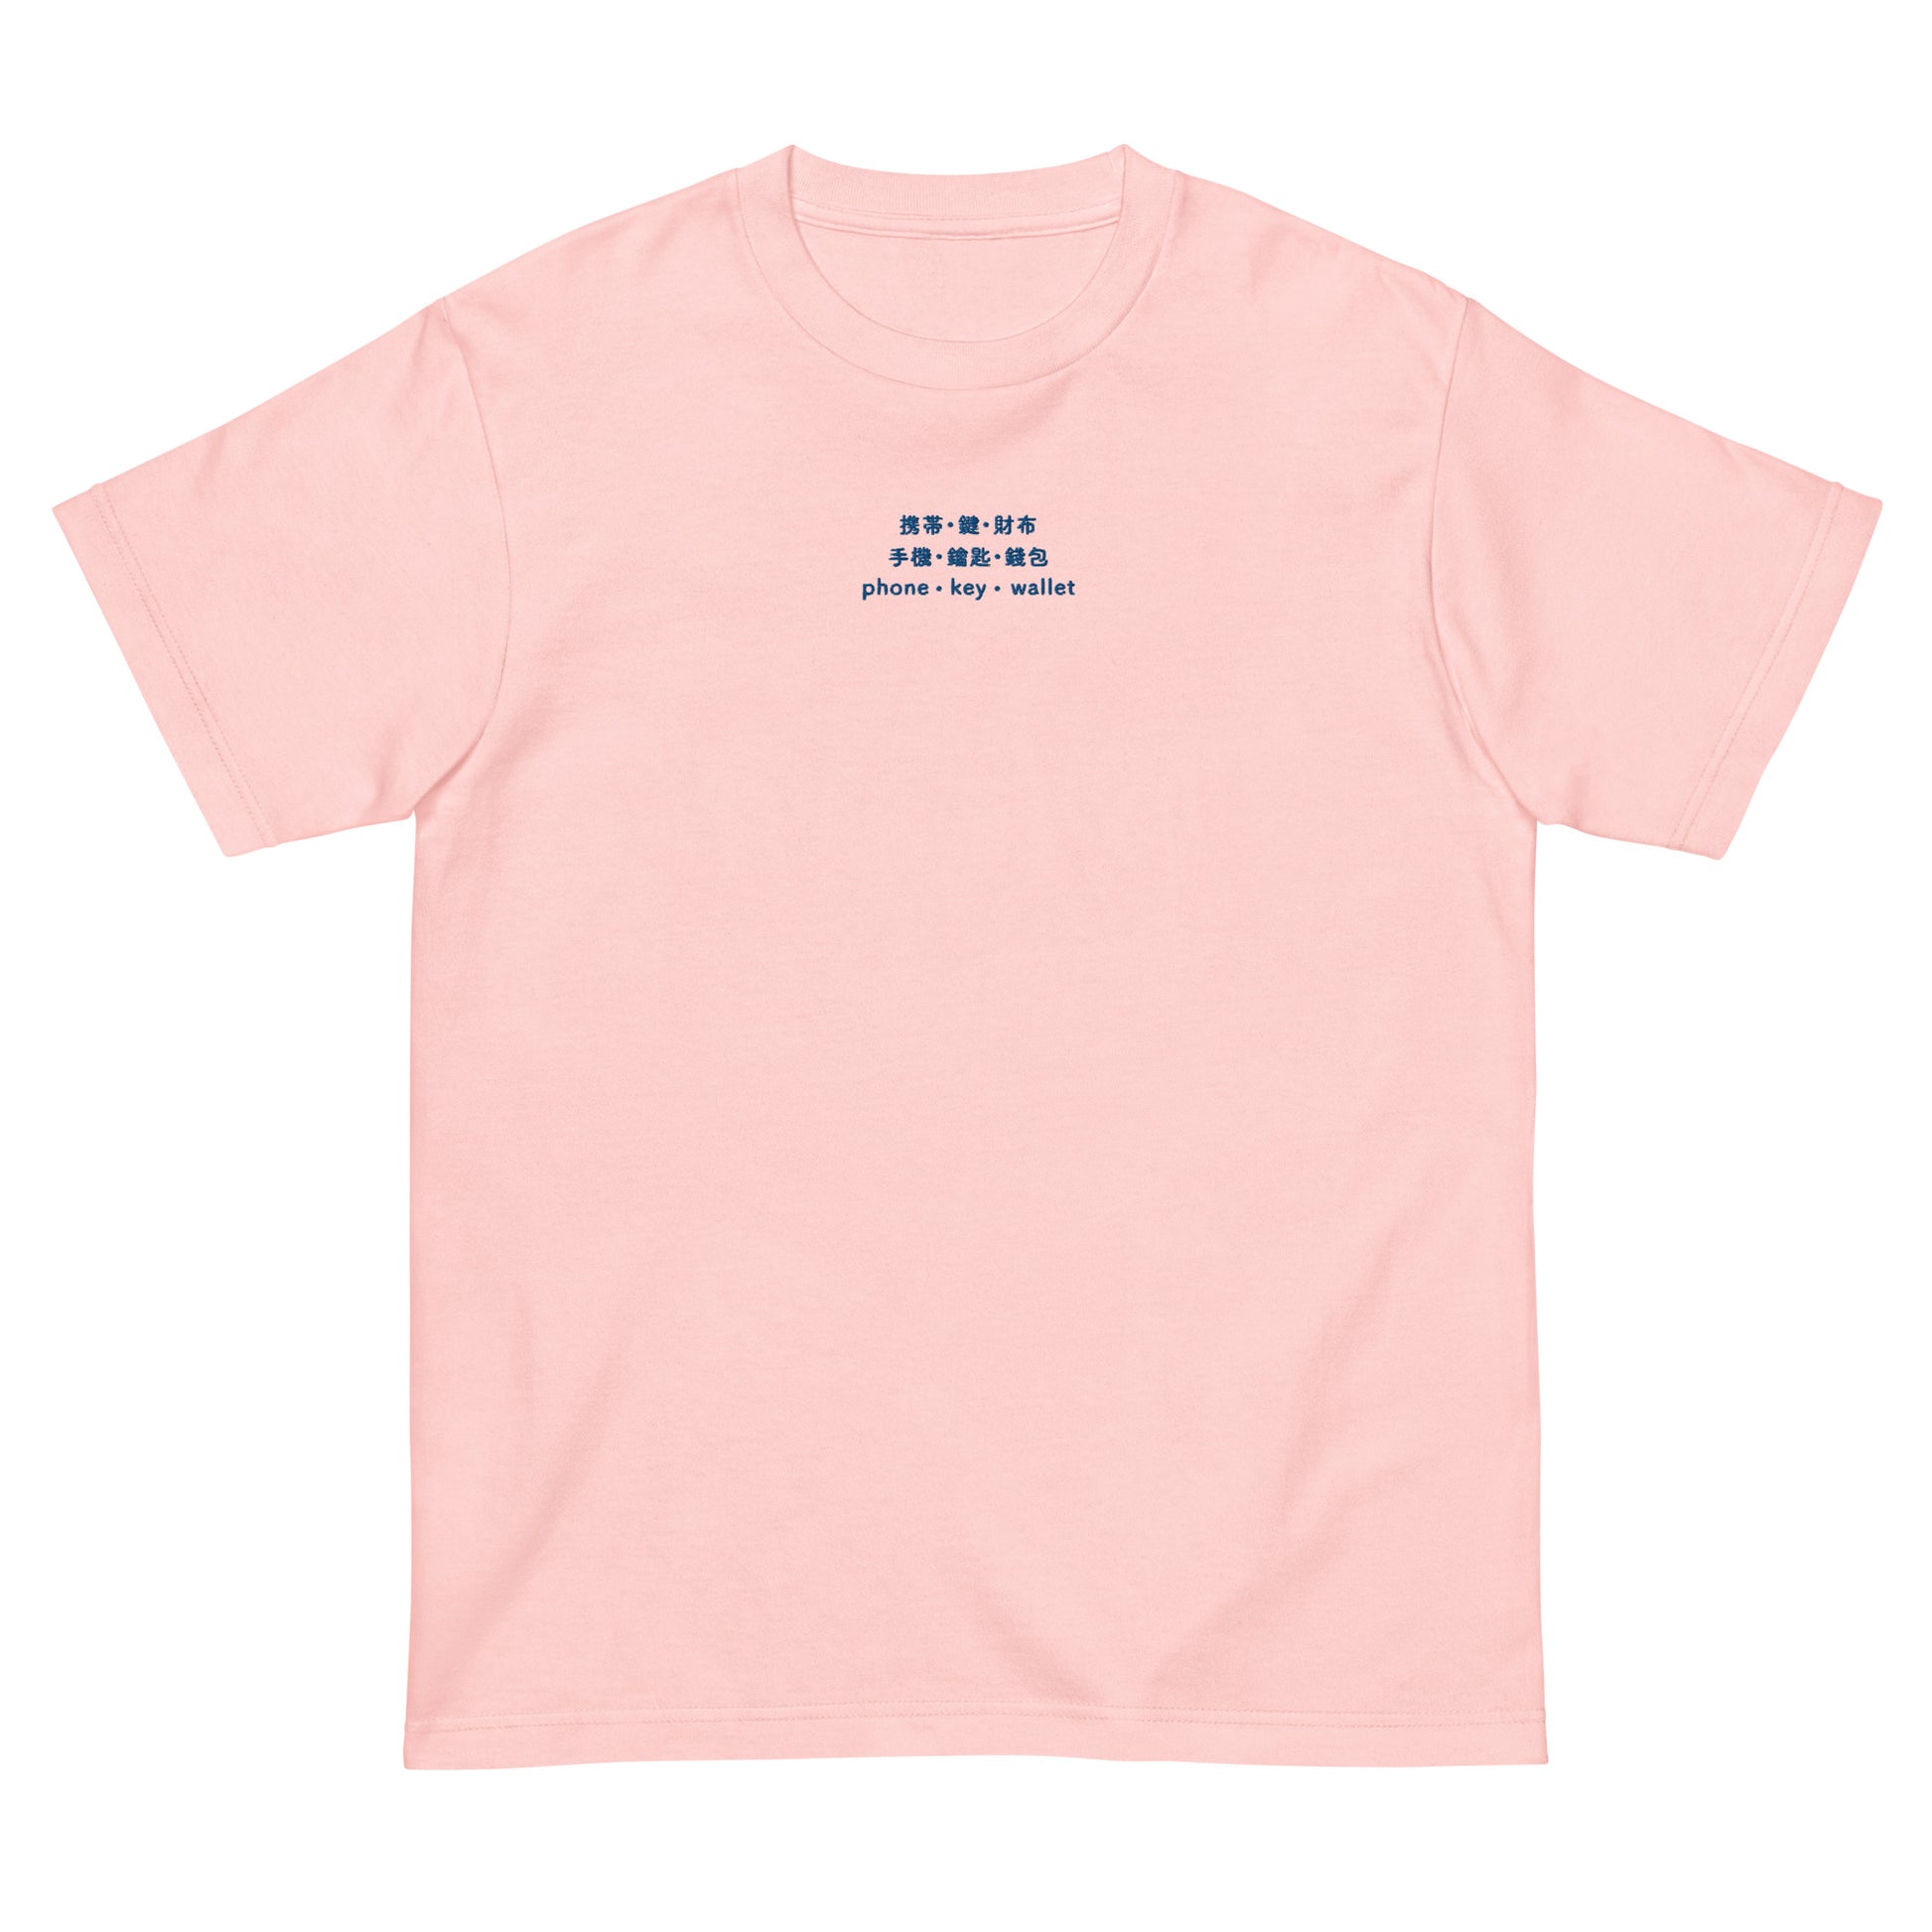 Pink High Quality Tee - Front Design with an Blue Embroidery "Phone/Key/Wallet" in Japanese,Chinese and English